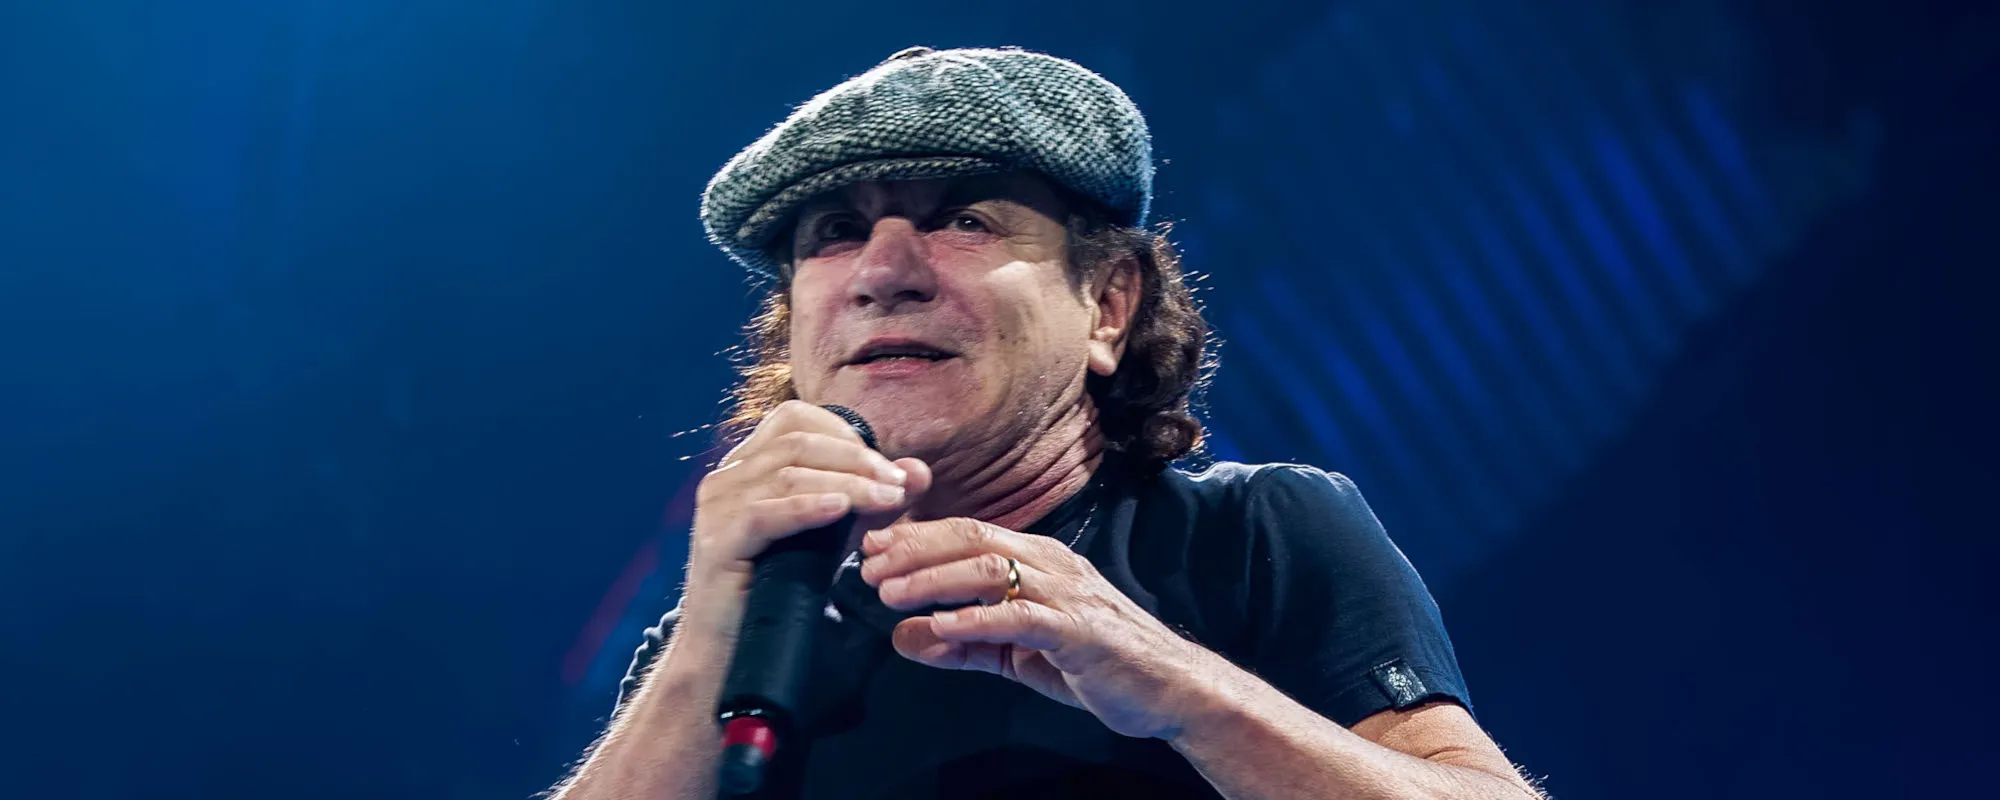 Statue of AC/DC’s Brian Johnson Now Stands in Belgium